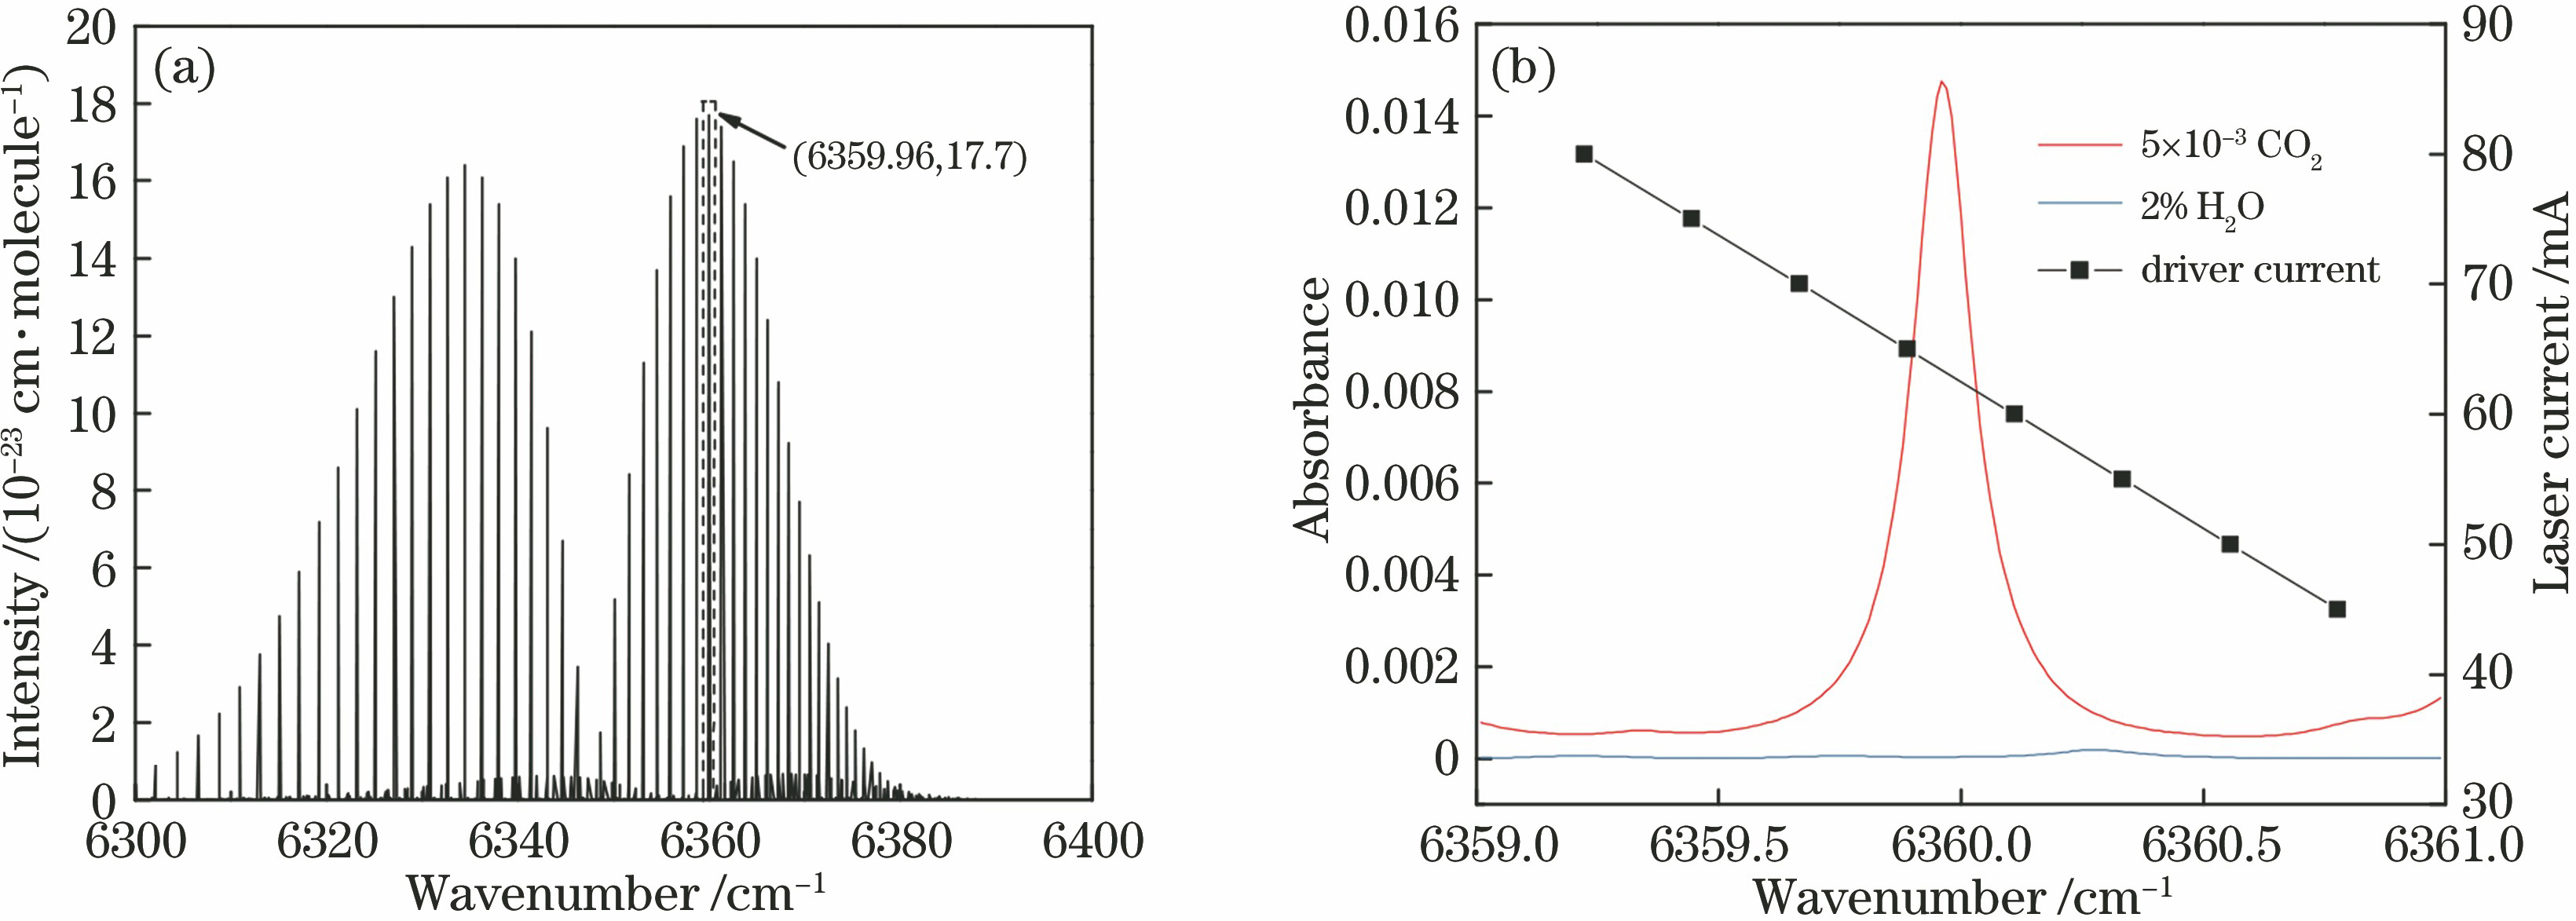 Selection of CO2 absorption line. (a) Absorption spectra of CO2; (b) absorbance of CO2 and H2O, and driver current as a function of laser emission wavenumber at operation temperature of 28 ℃